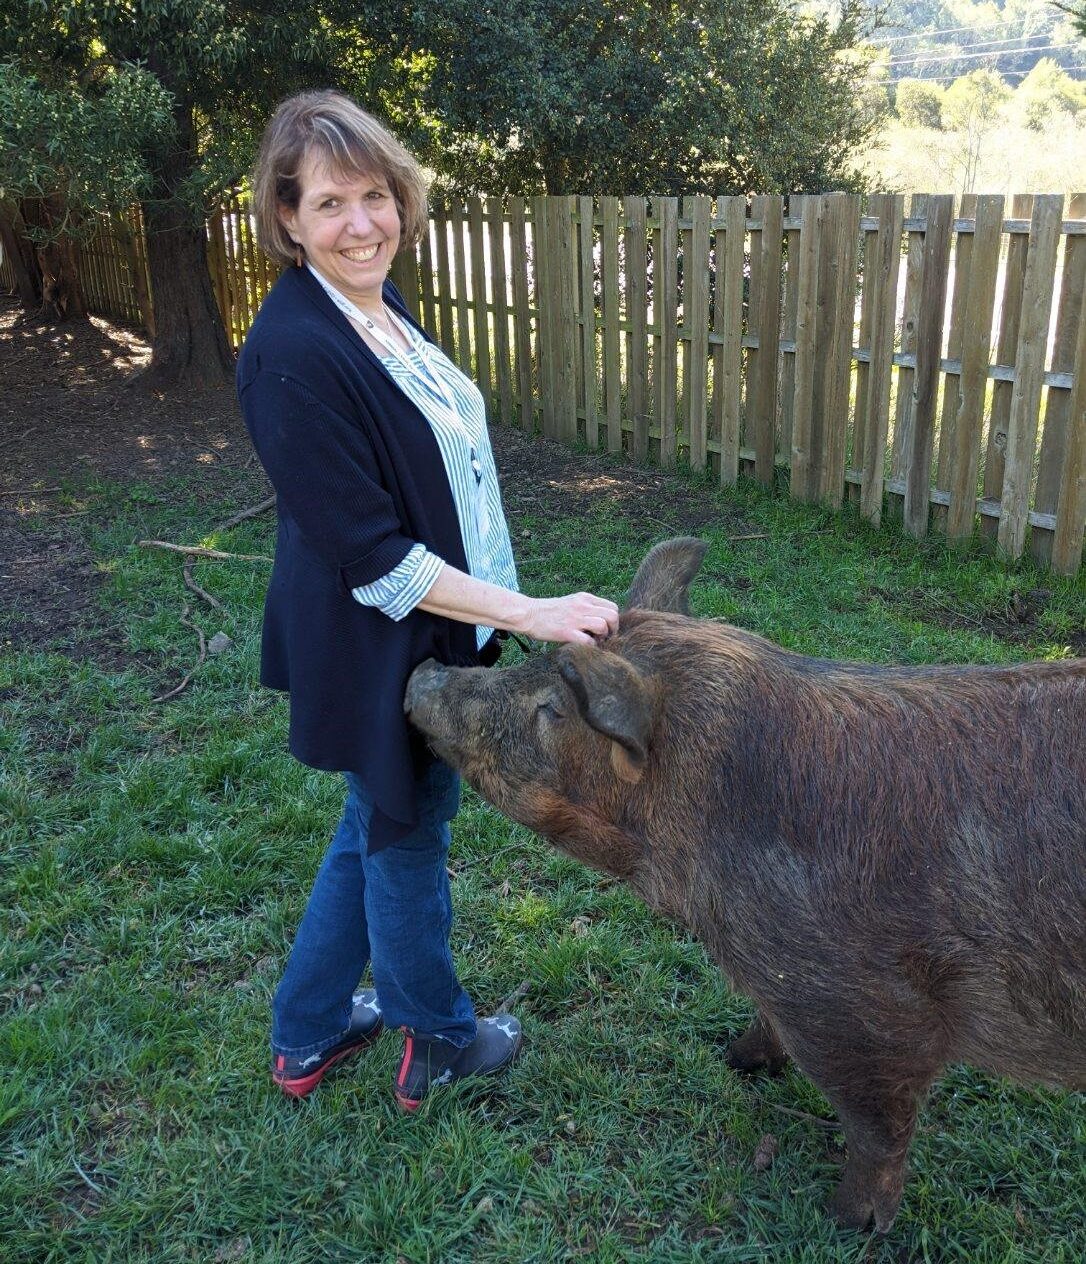 Stacey with a pig